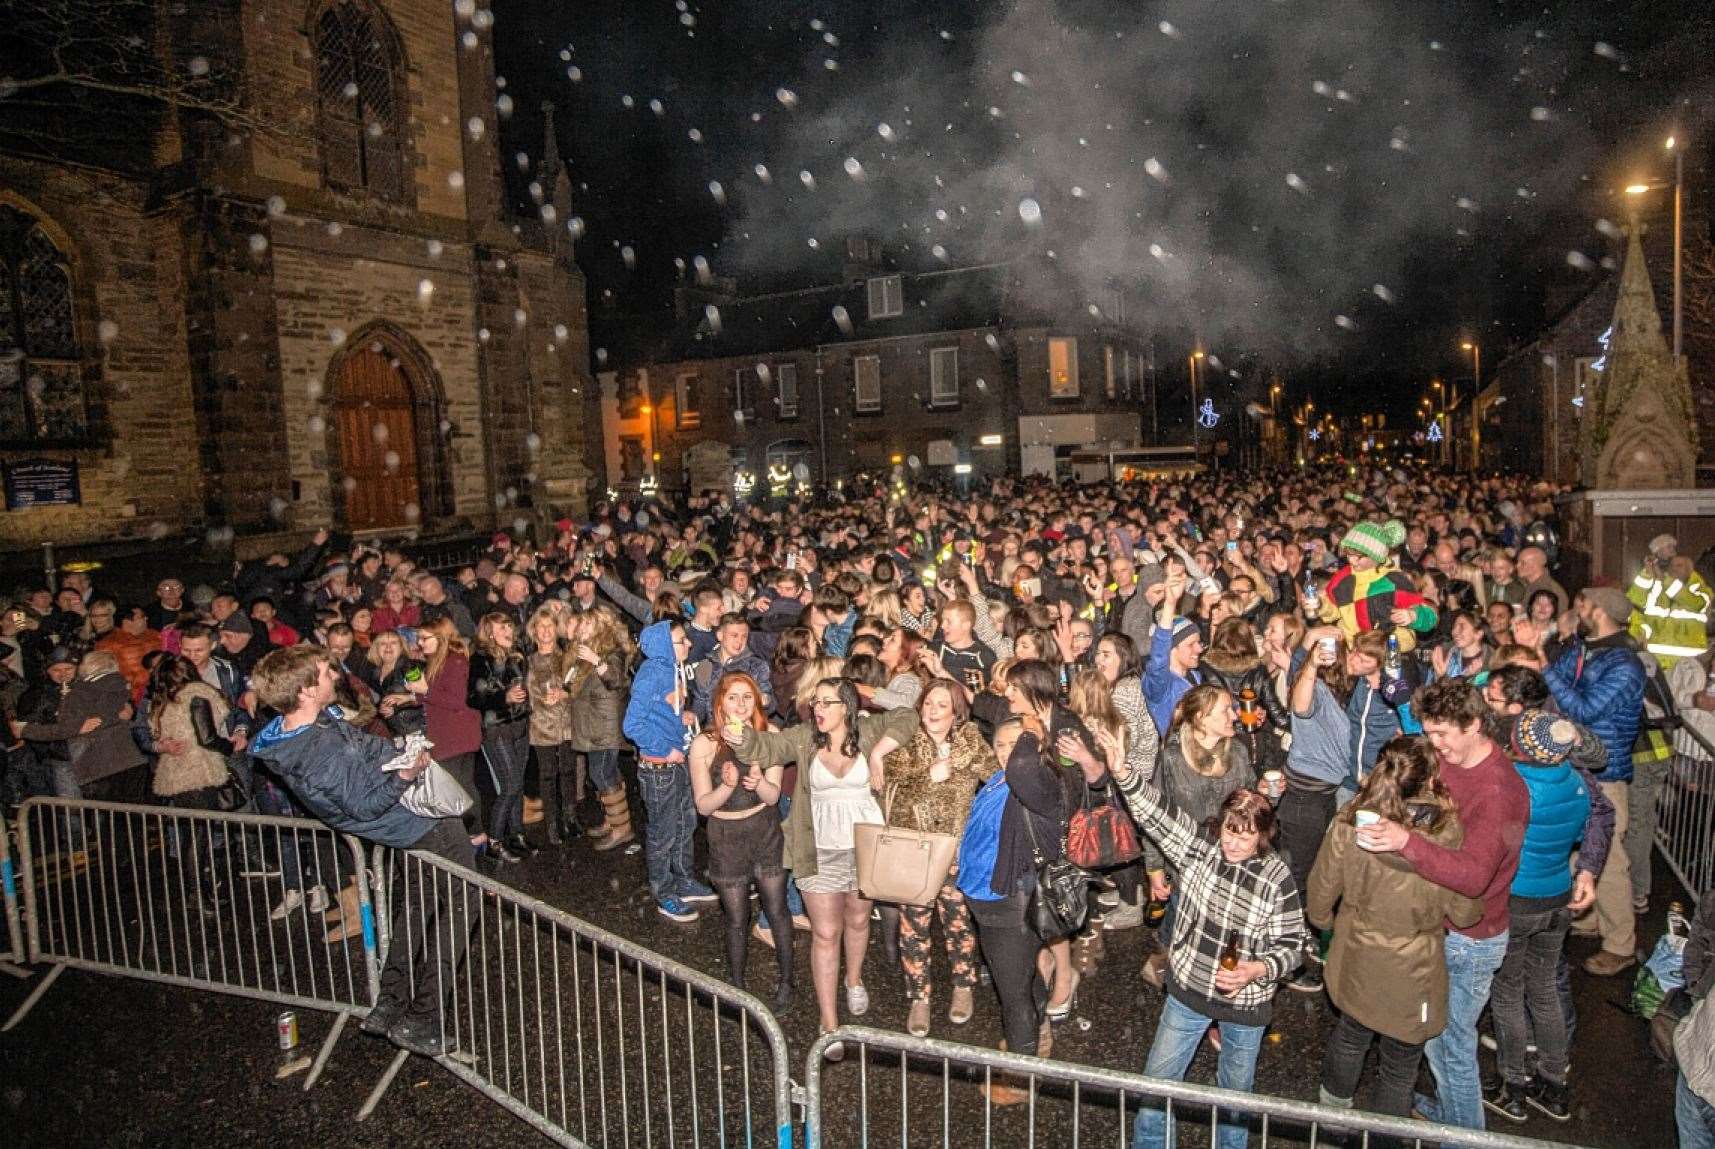 Around 2500 revellers welcomed 2015 at the New Year street party in Thurso town centre, in the mildest Hogmanay weather anyone could remember. Picture: Ann-Marie Jones / Northern Studios